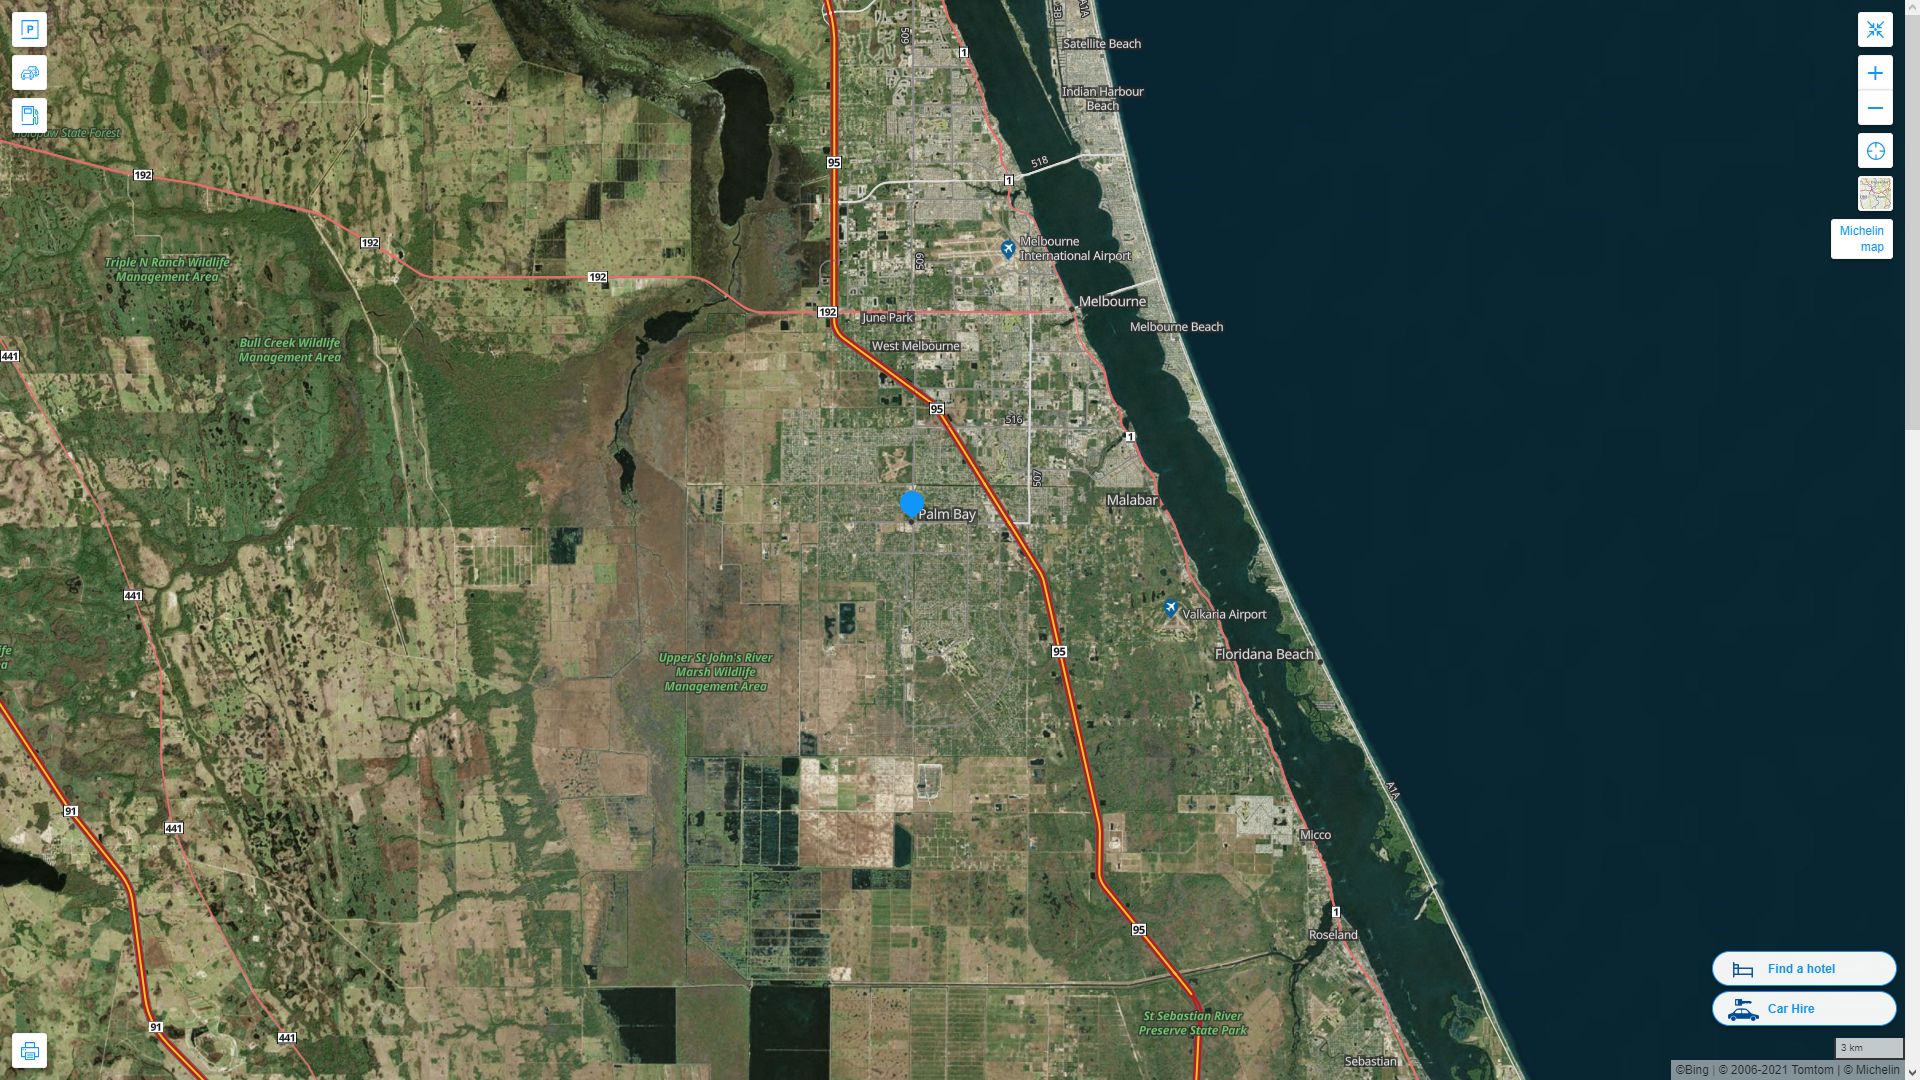 Palm Bay Florida Highway and Road Map with Satellite View